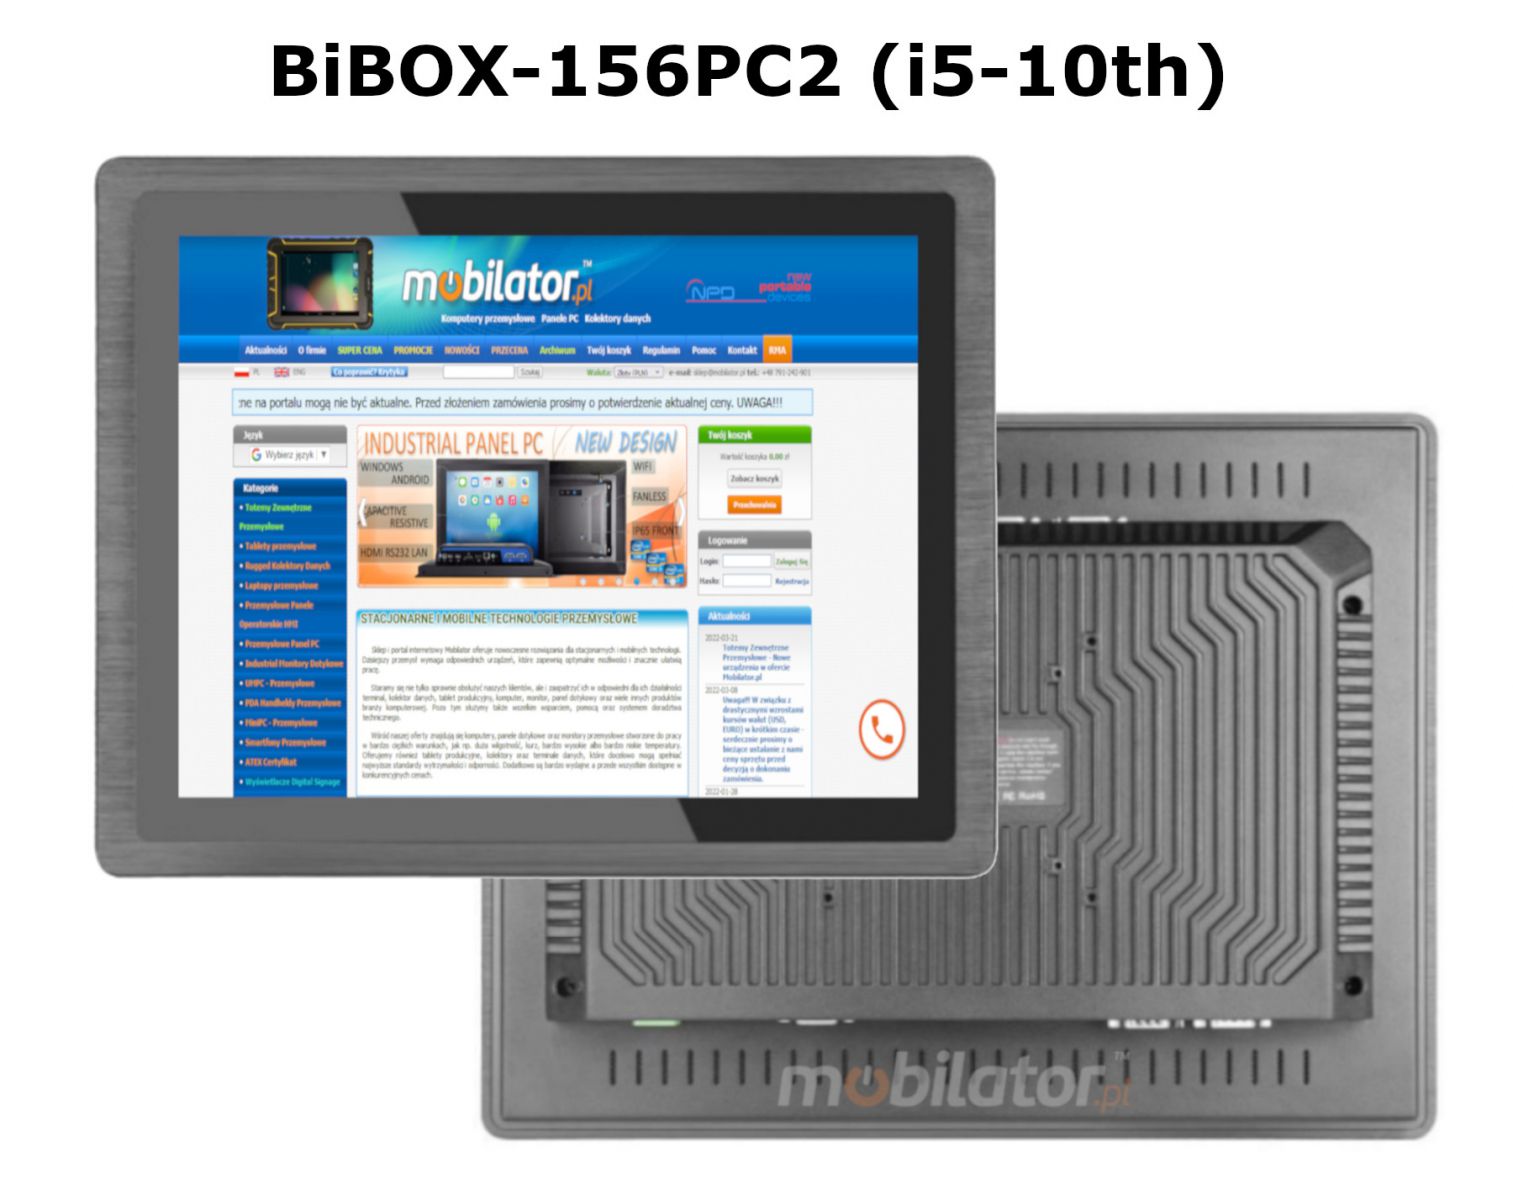 robust and spacious panel BIBOX-156PC2 equipped with WiFi and Bluetooth